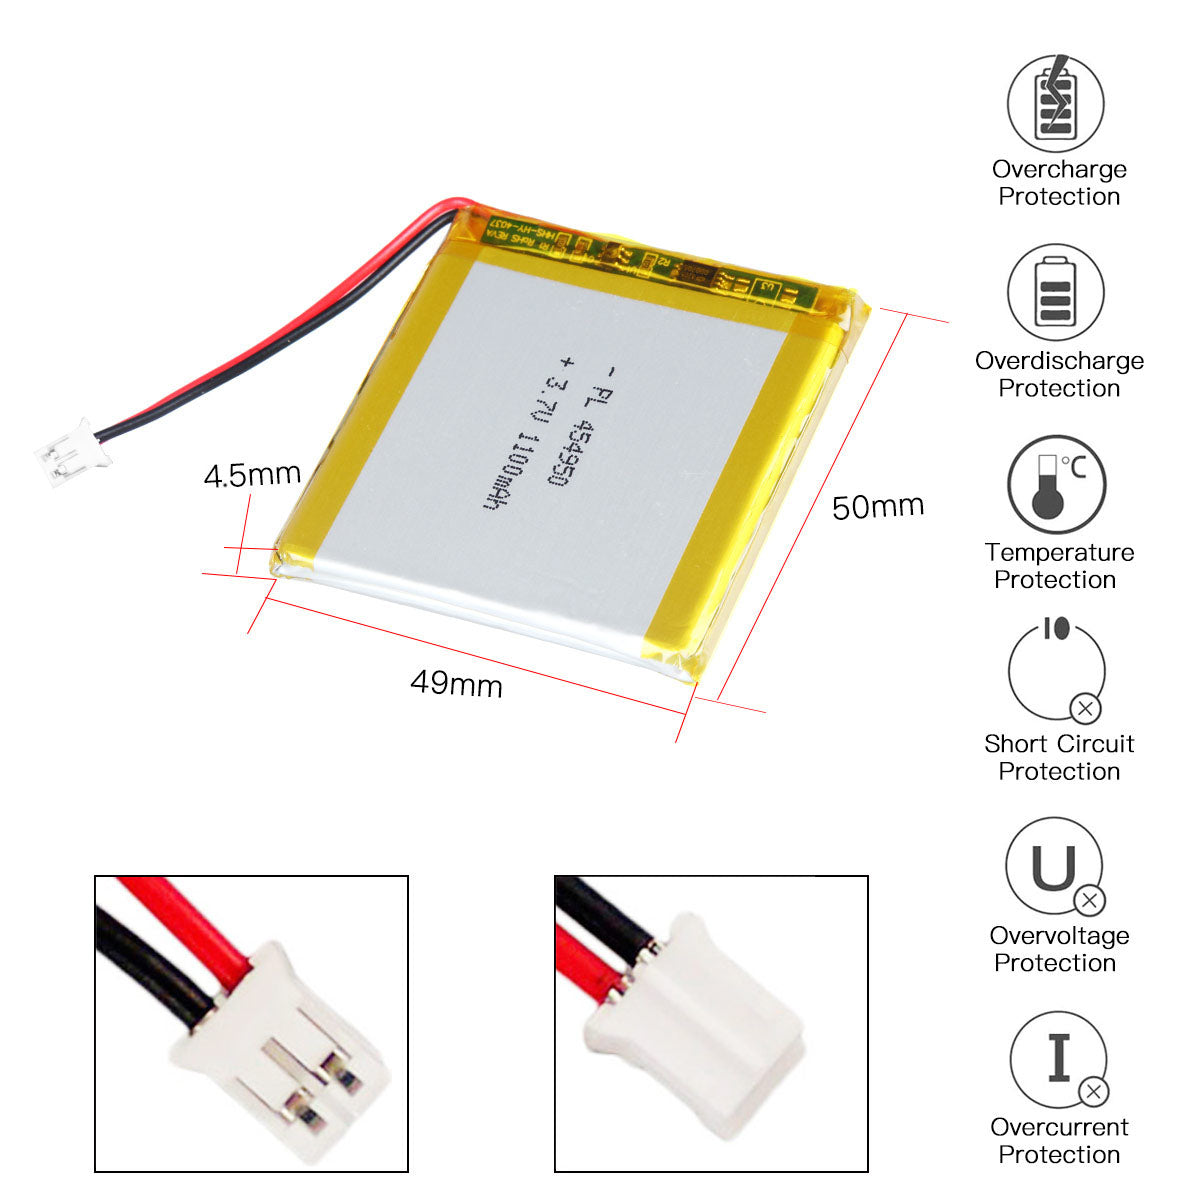 YDL 3.7V 1100mAh 454950 Rechargeable Lithium Polymer Battery Length 52mm